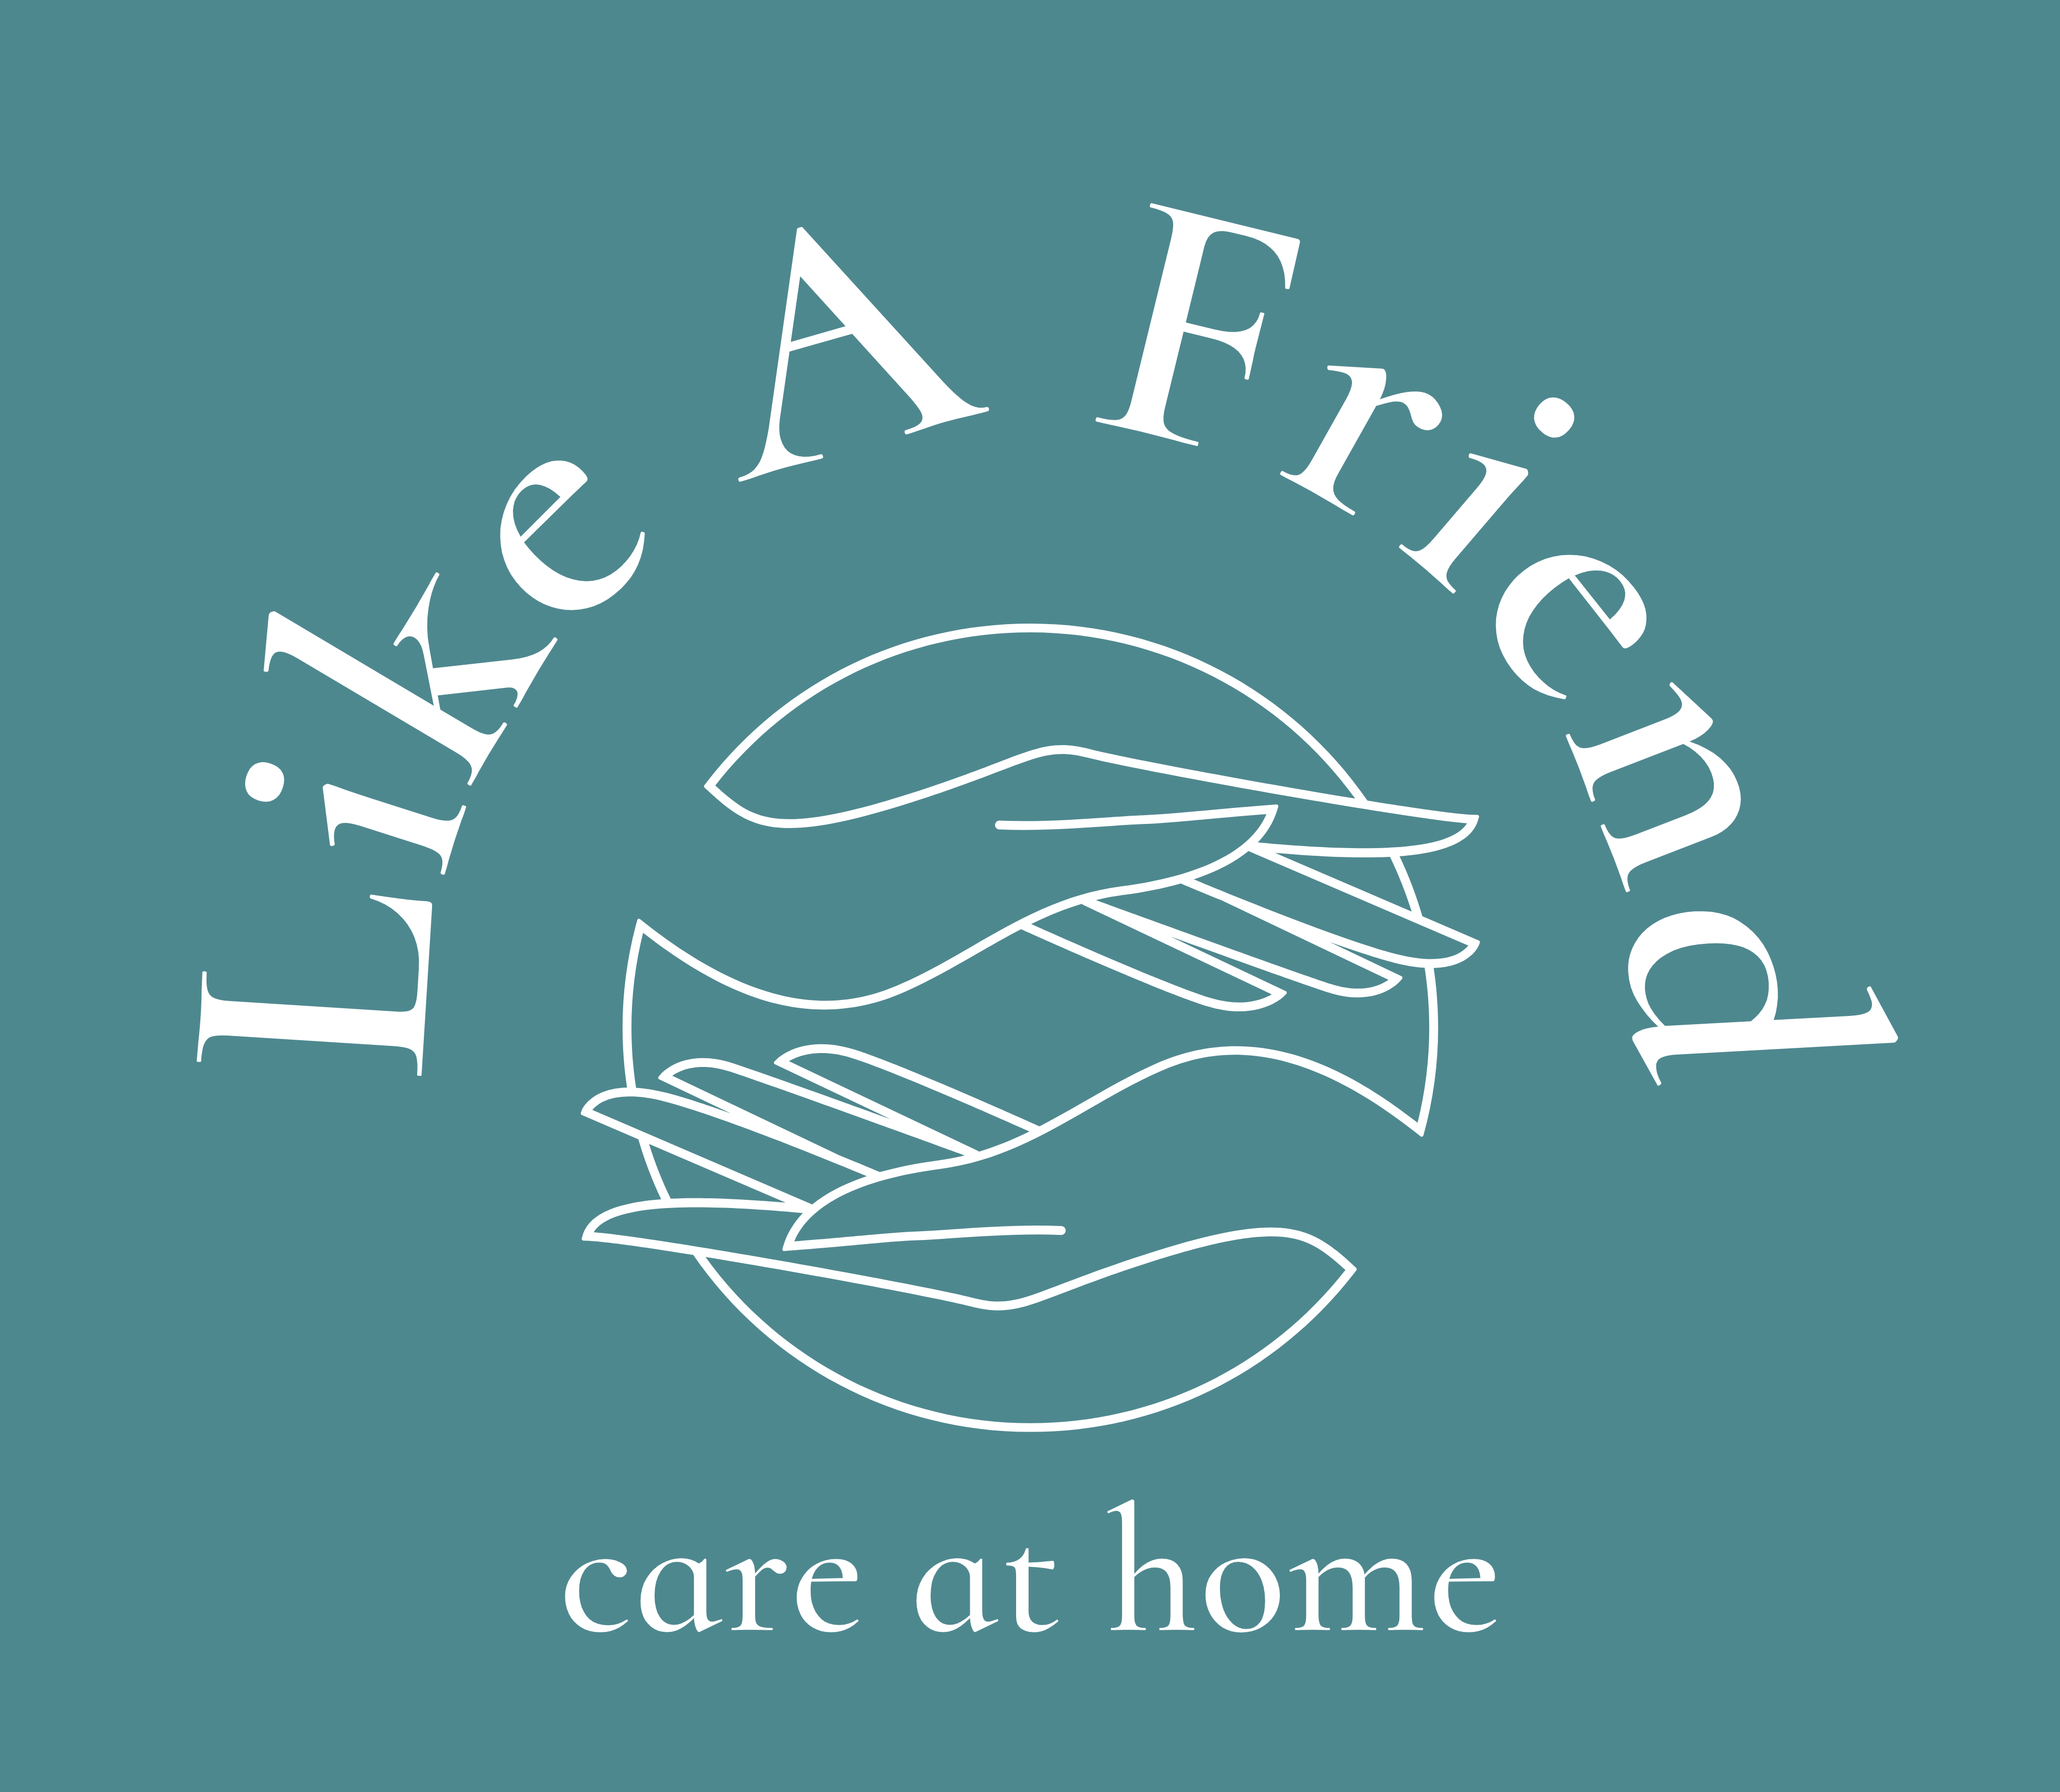 Like a Friend care at home white text on a blue green background wrapped around a drawing of two open hands above each other palms facing each other's